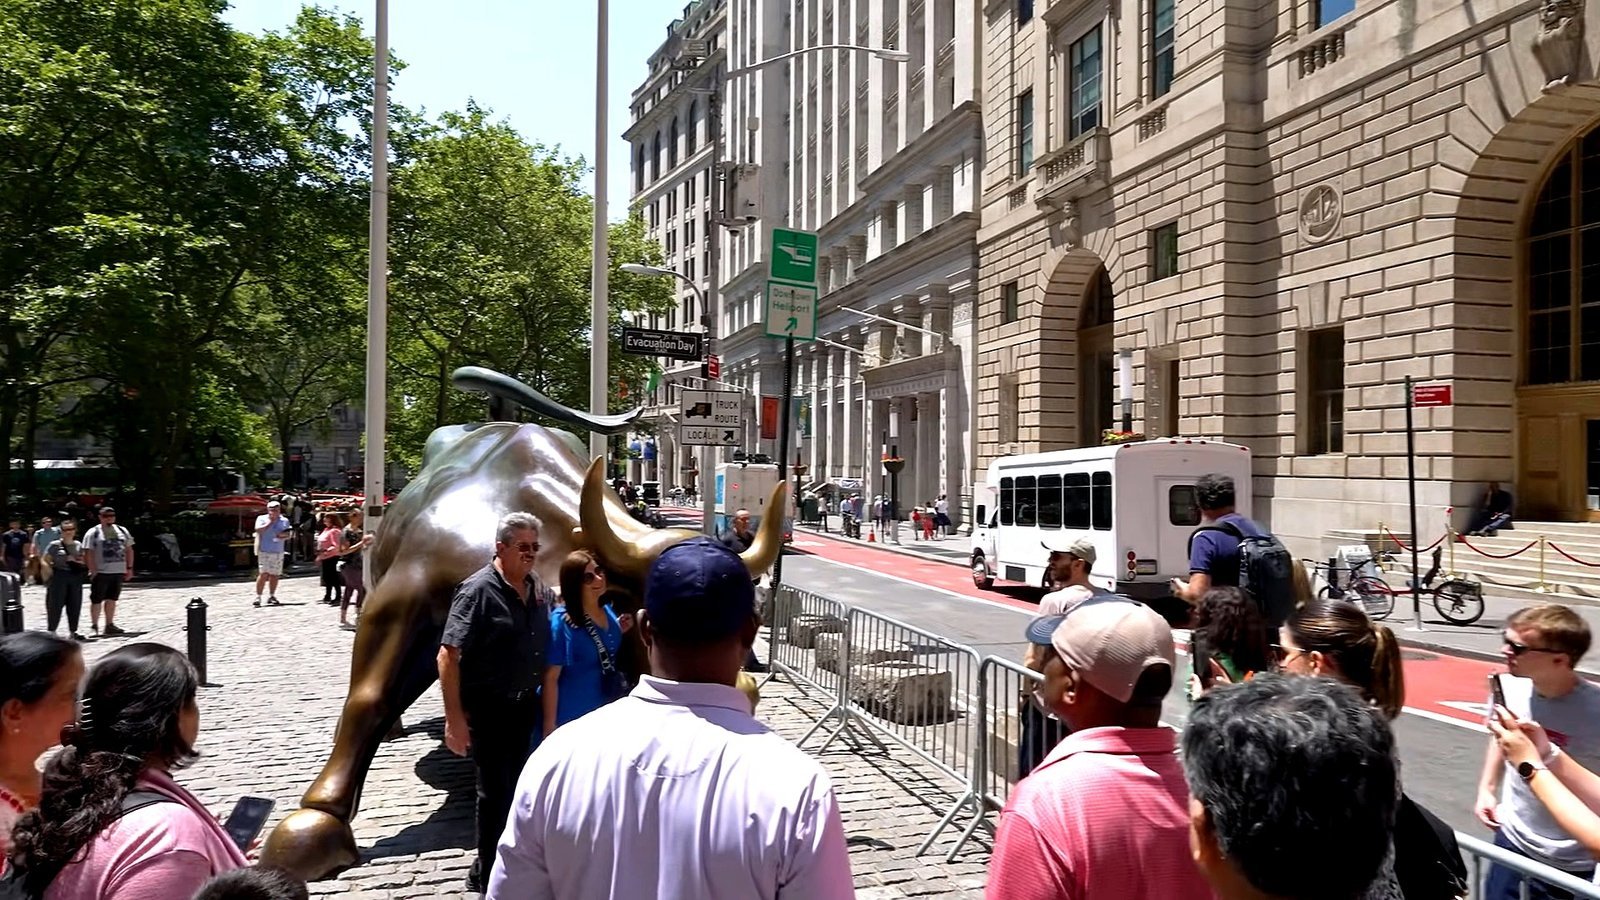 New York City Charging Bull (Financial District) (Image-12)